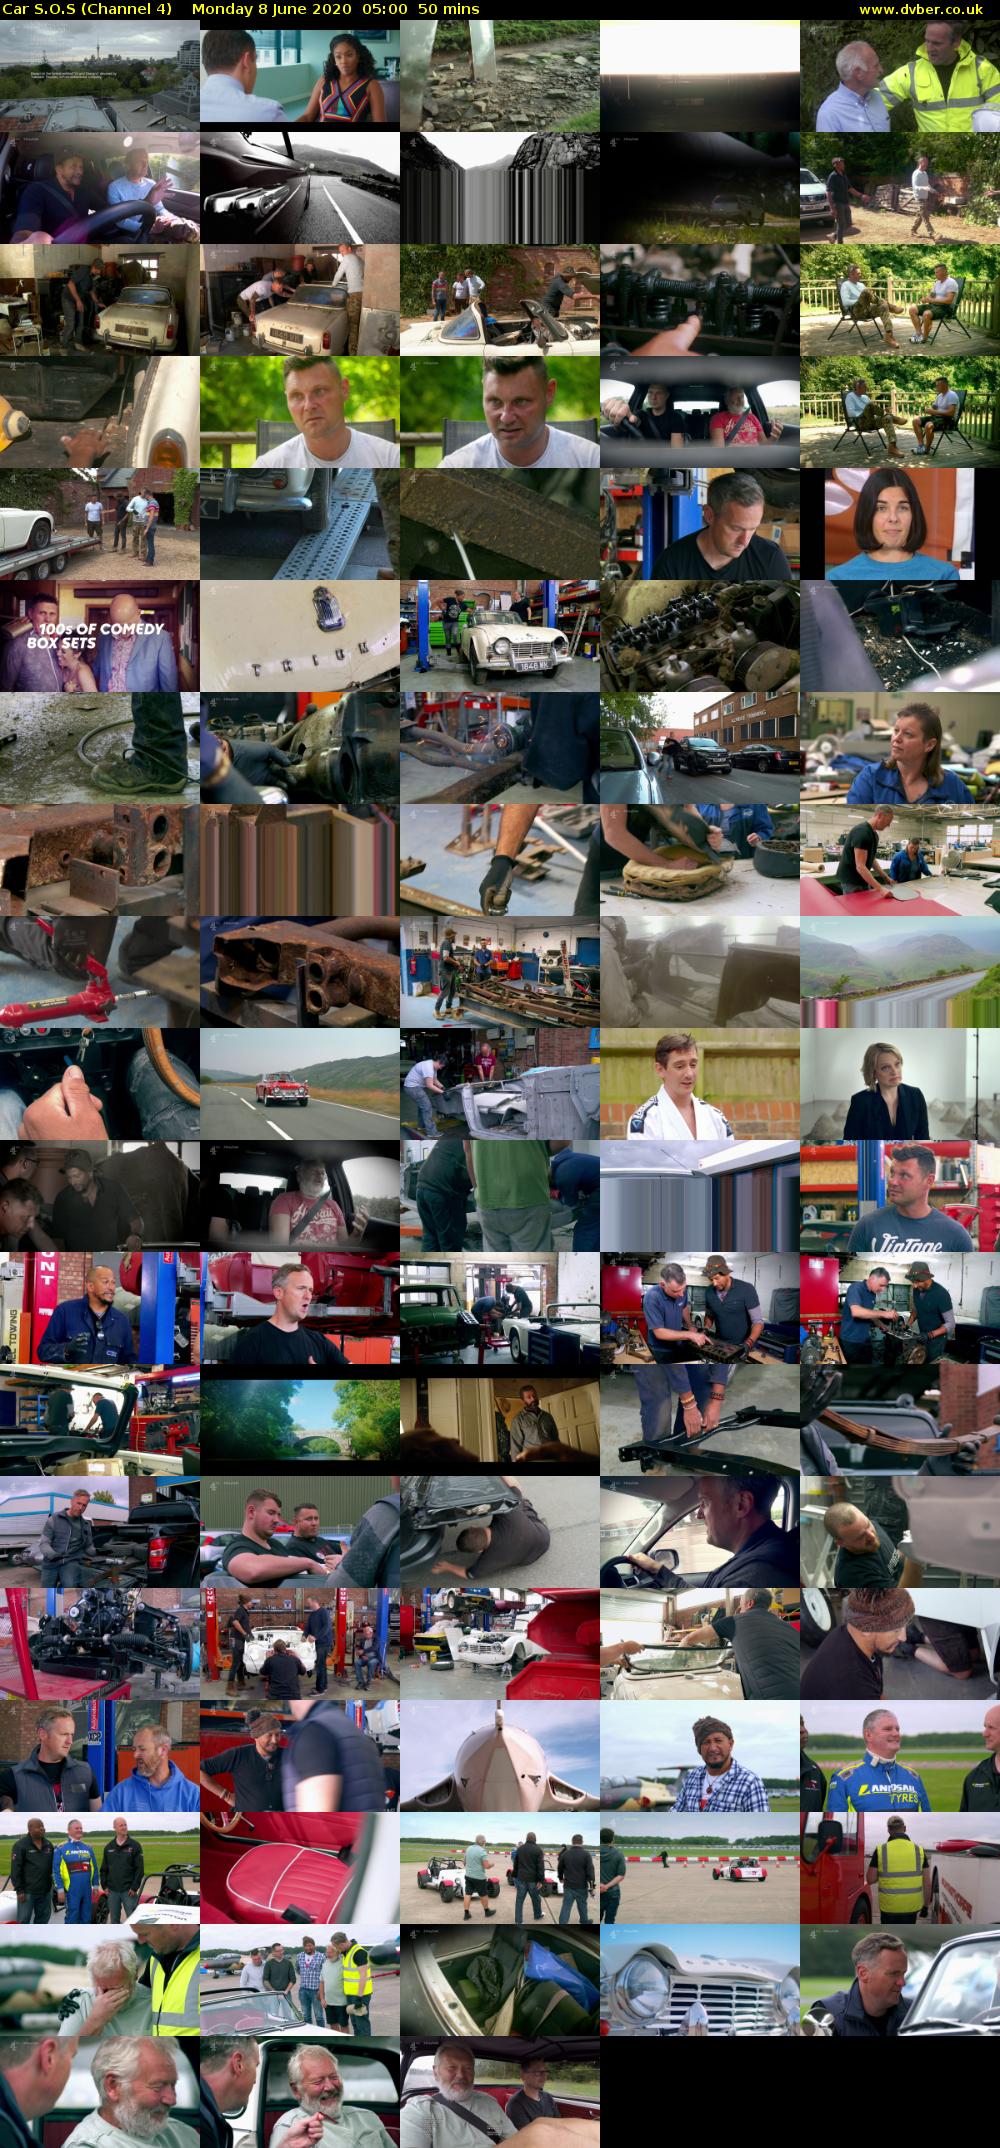 Car S.O.S (Channel 4) Monday 8 June 2020 05:00 - 05:50